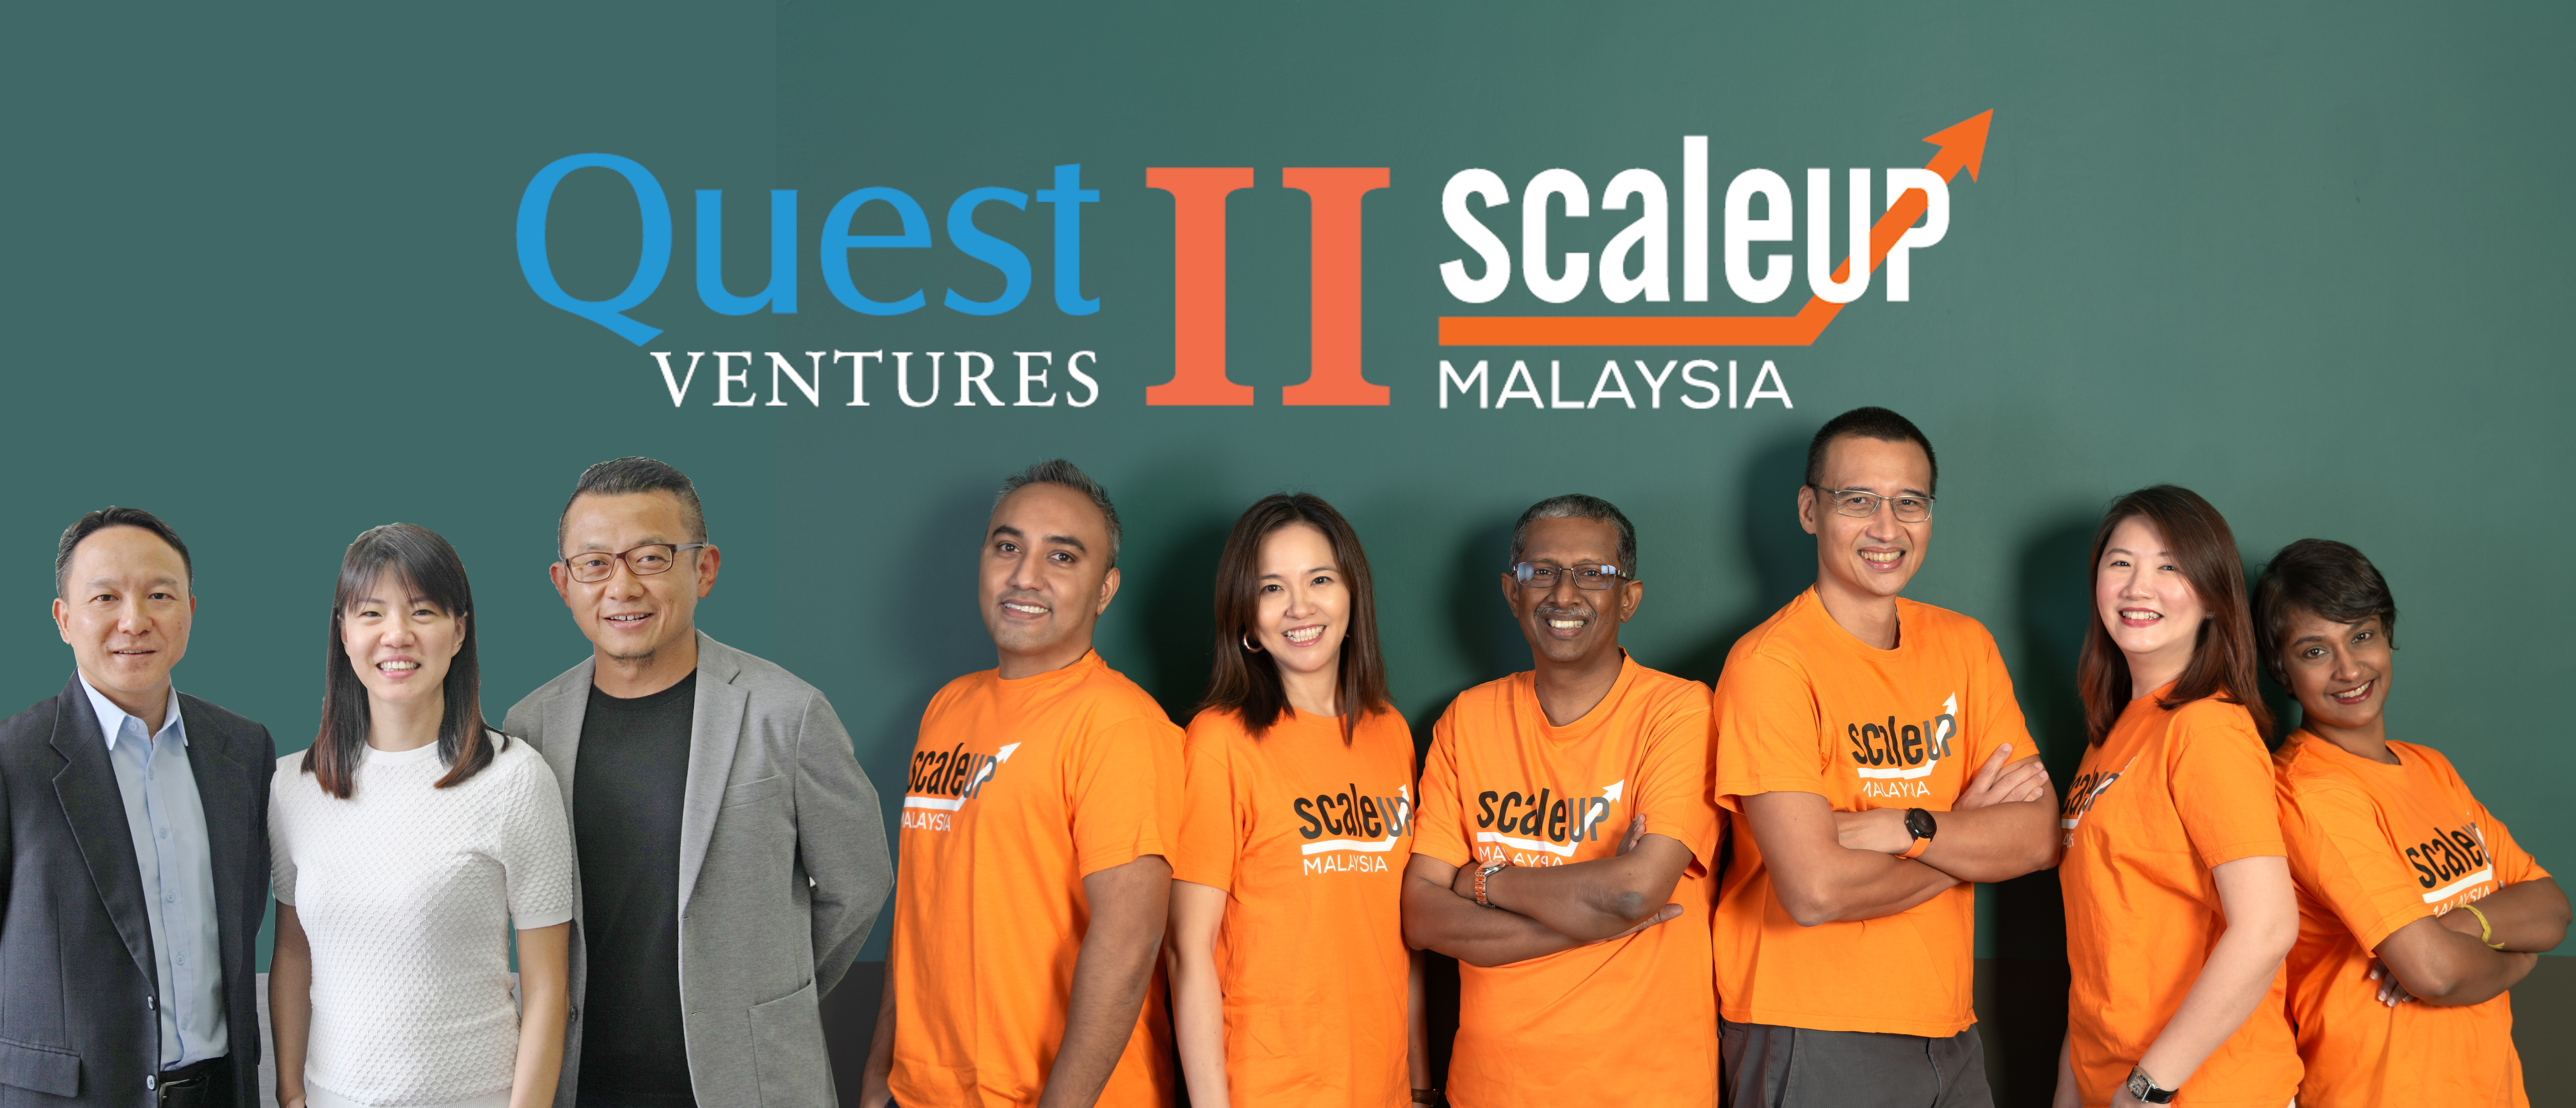 Quest Ventures partners with ScaleUp Malaysia to power local startups